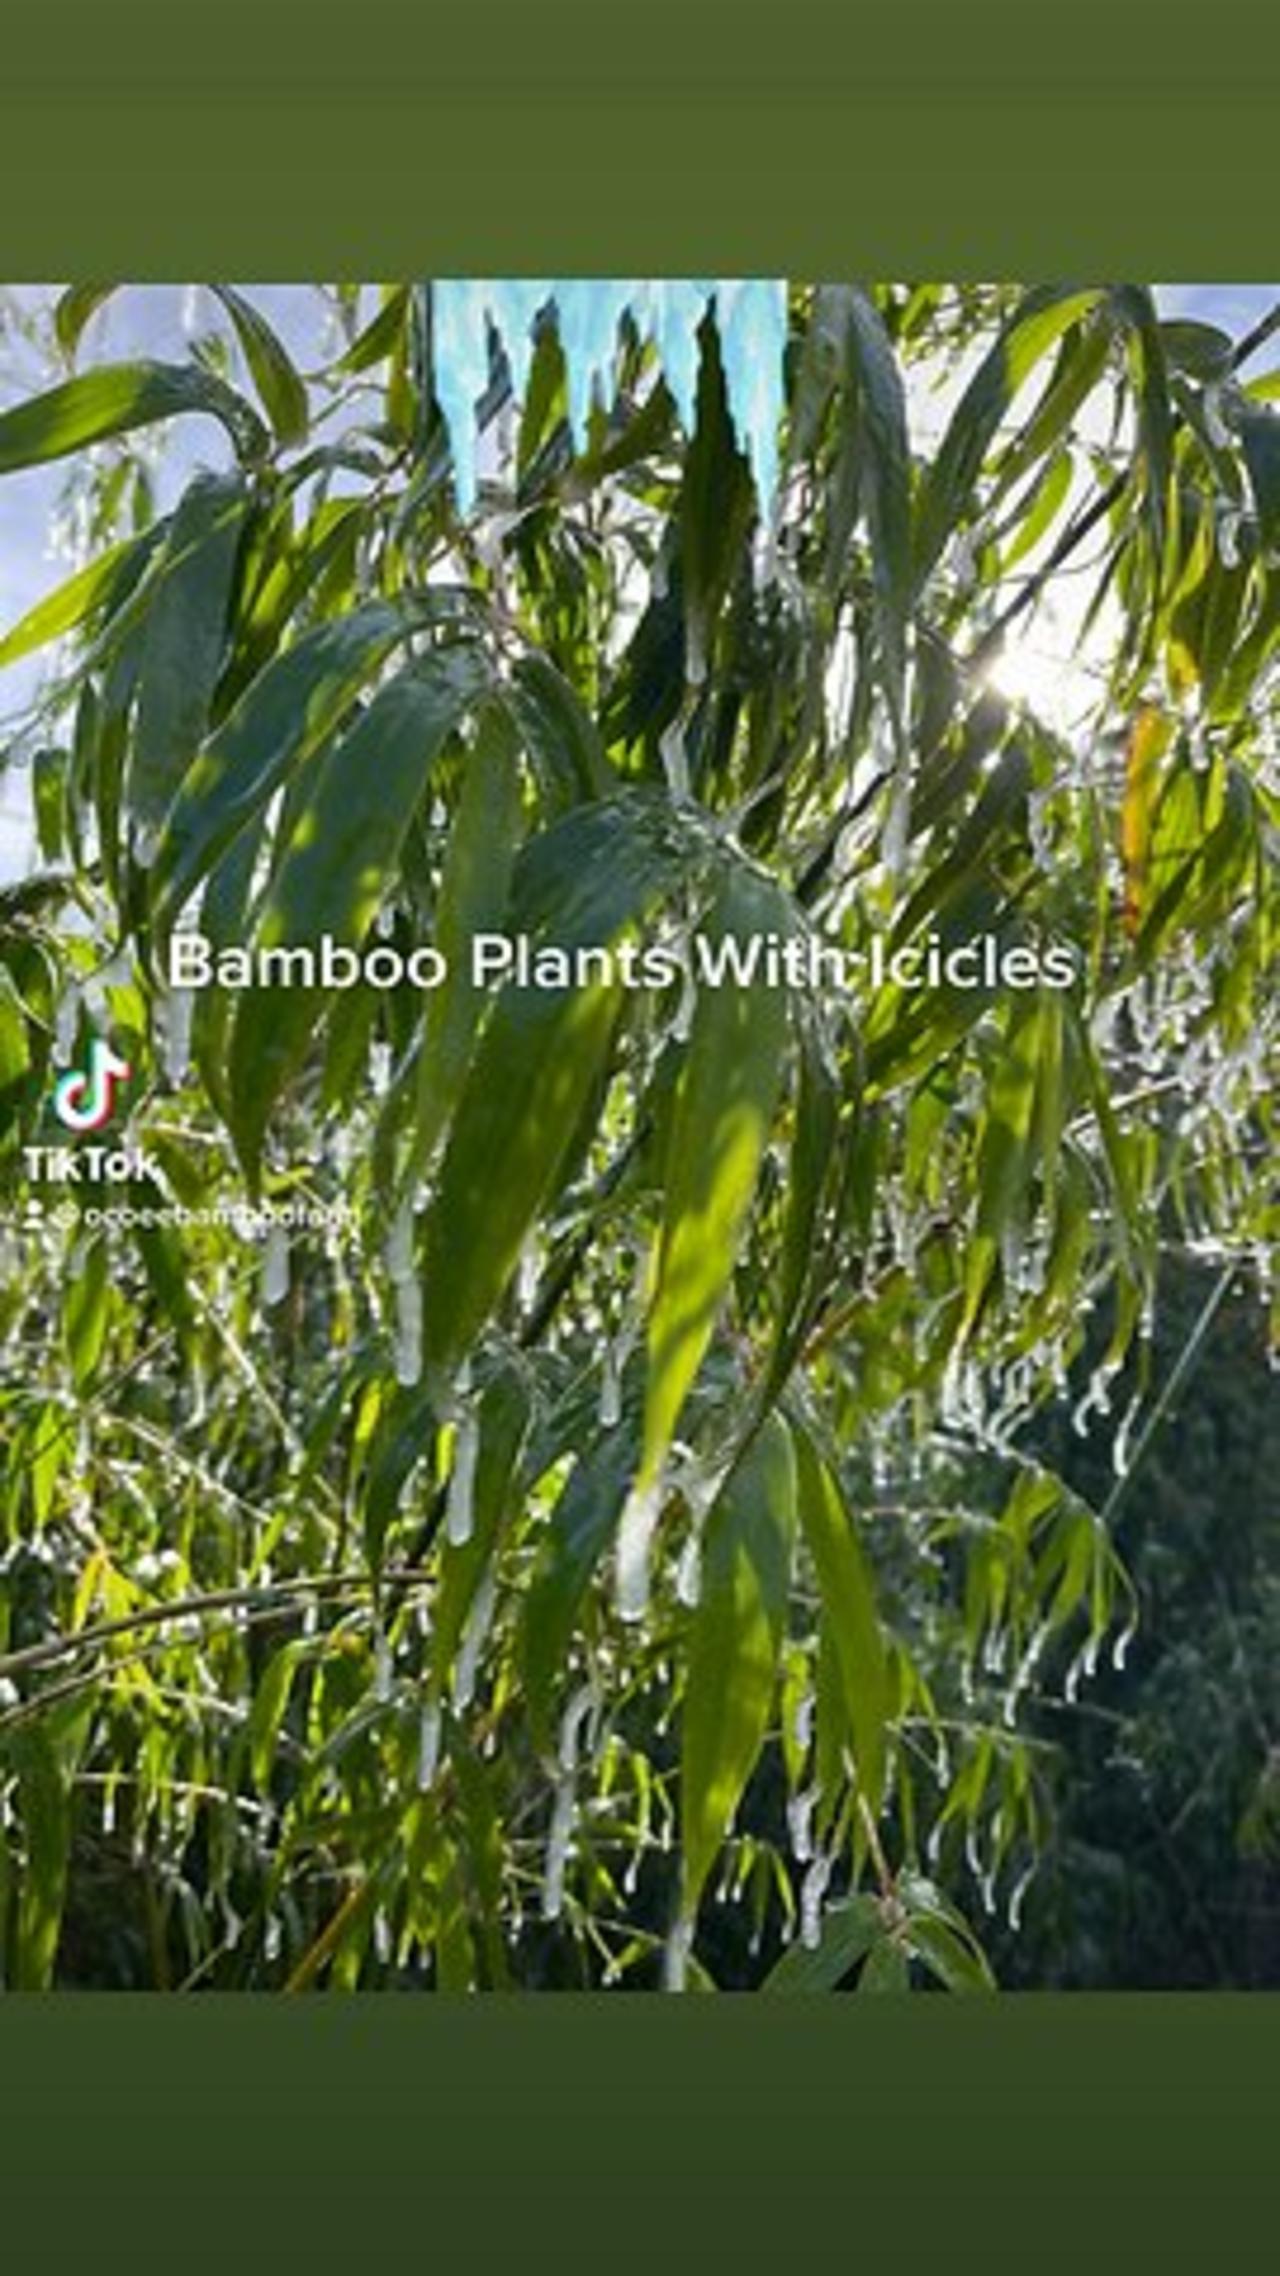 Does bamboo get damaged from the cold?